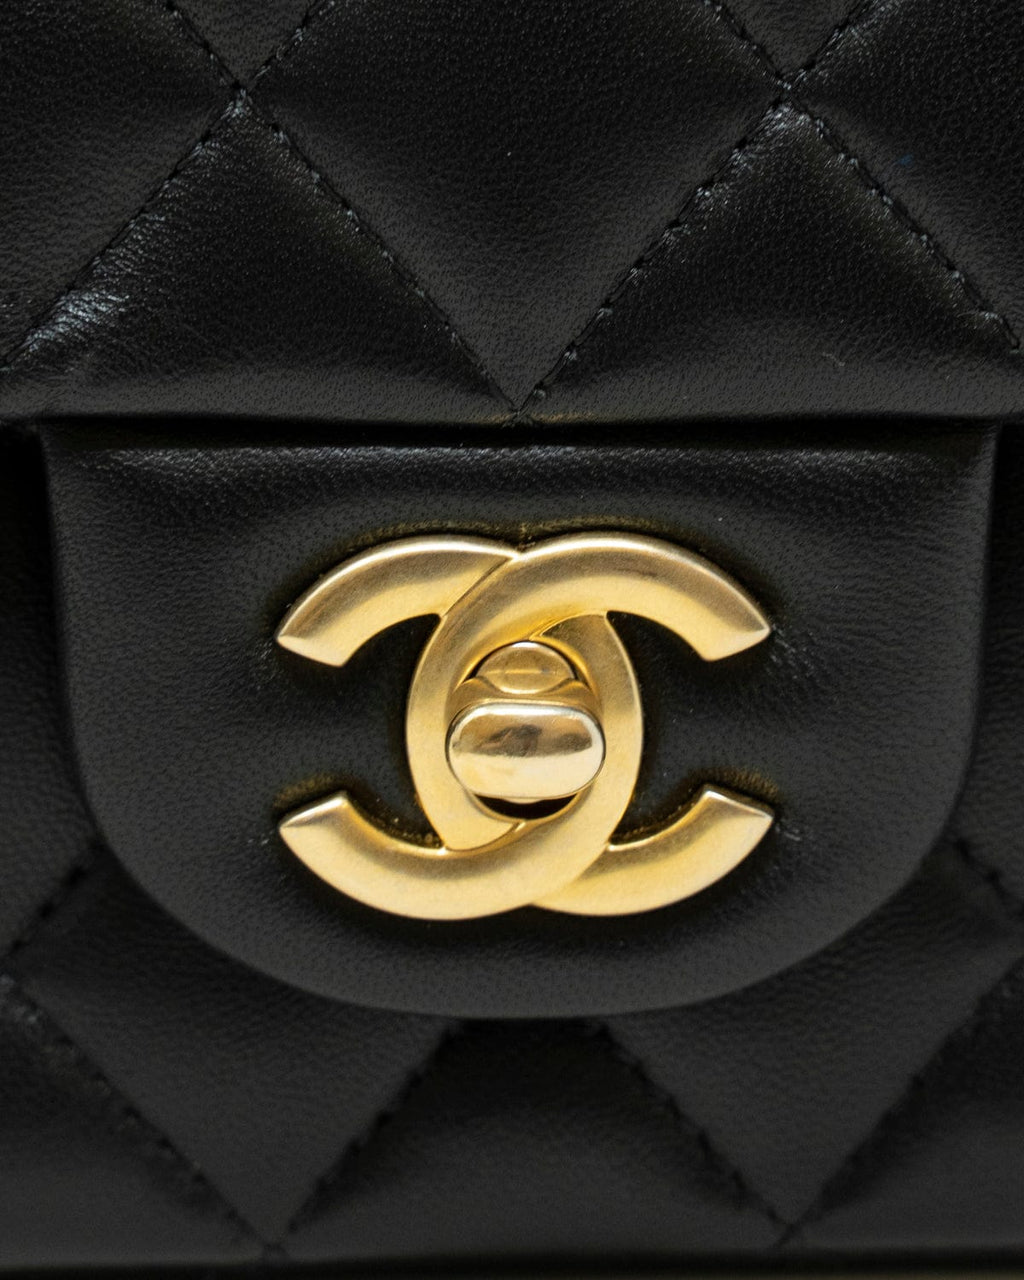 Chanel Mini Flap Bag With Top Handle, Luxury, Bags & Wallets on Carousell